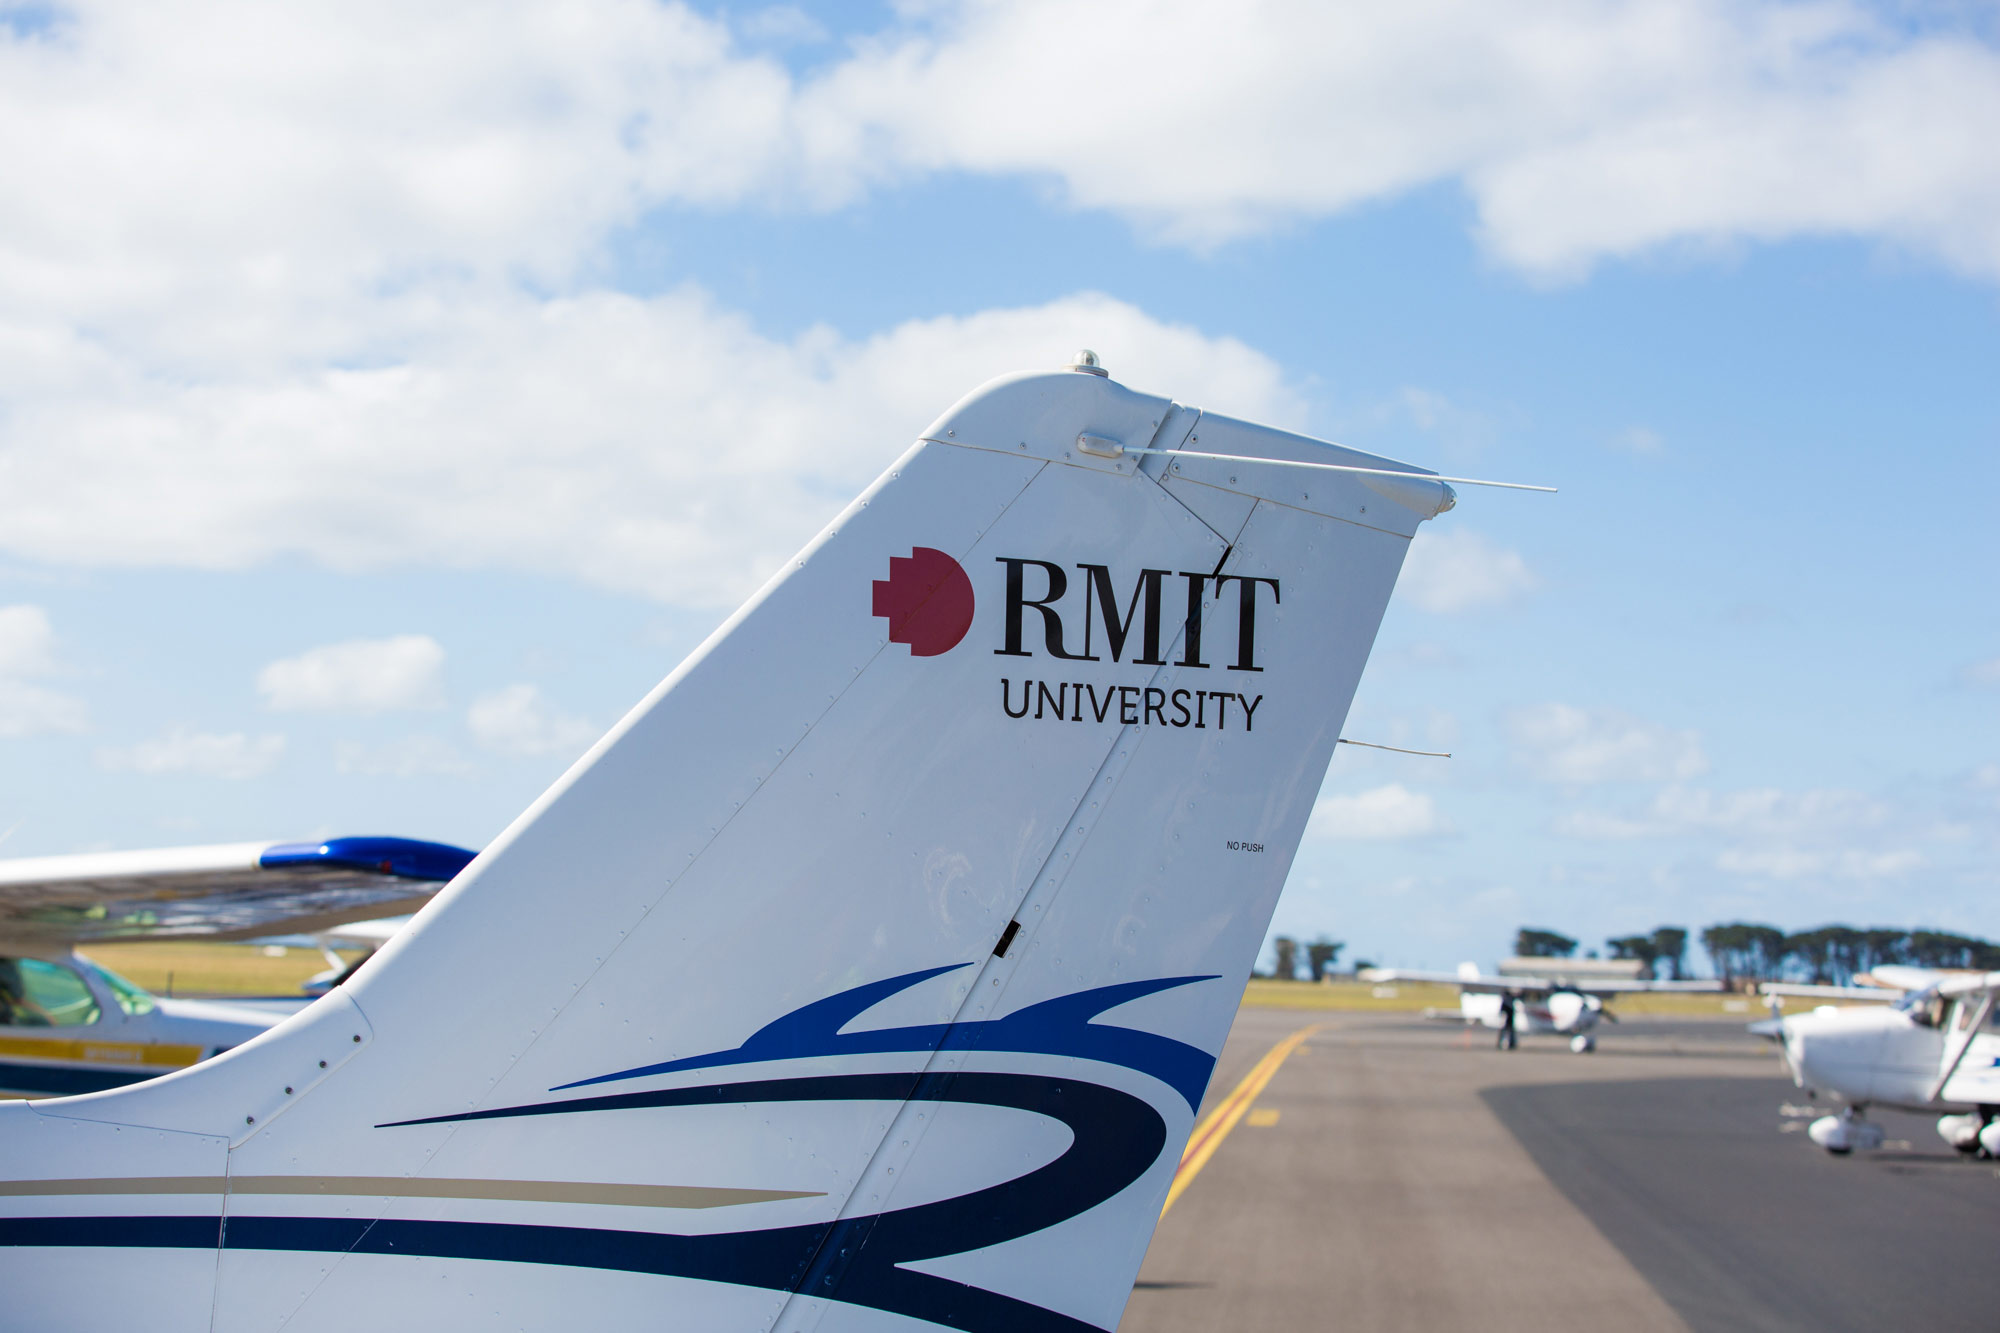 RMIT logo on the tail of an aeroplane